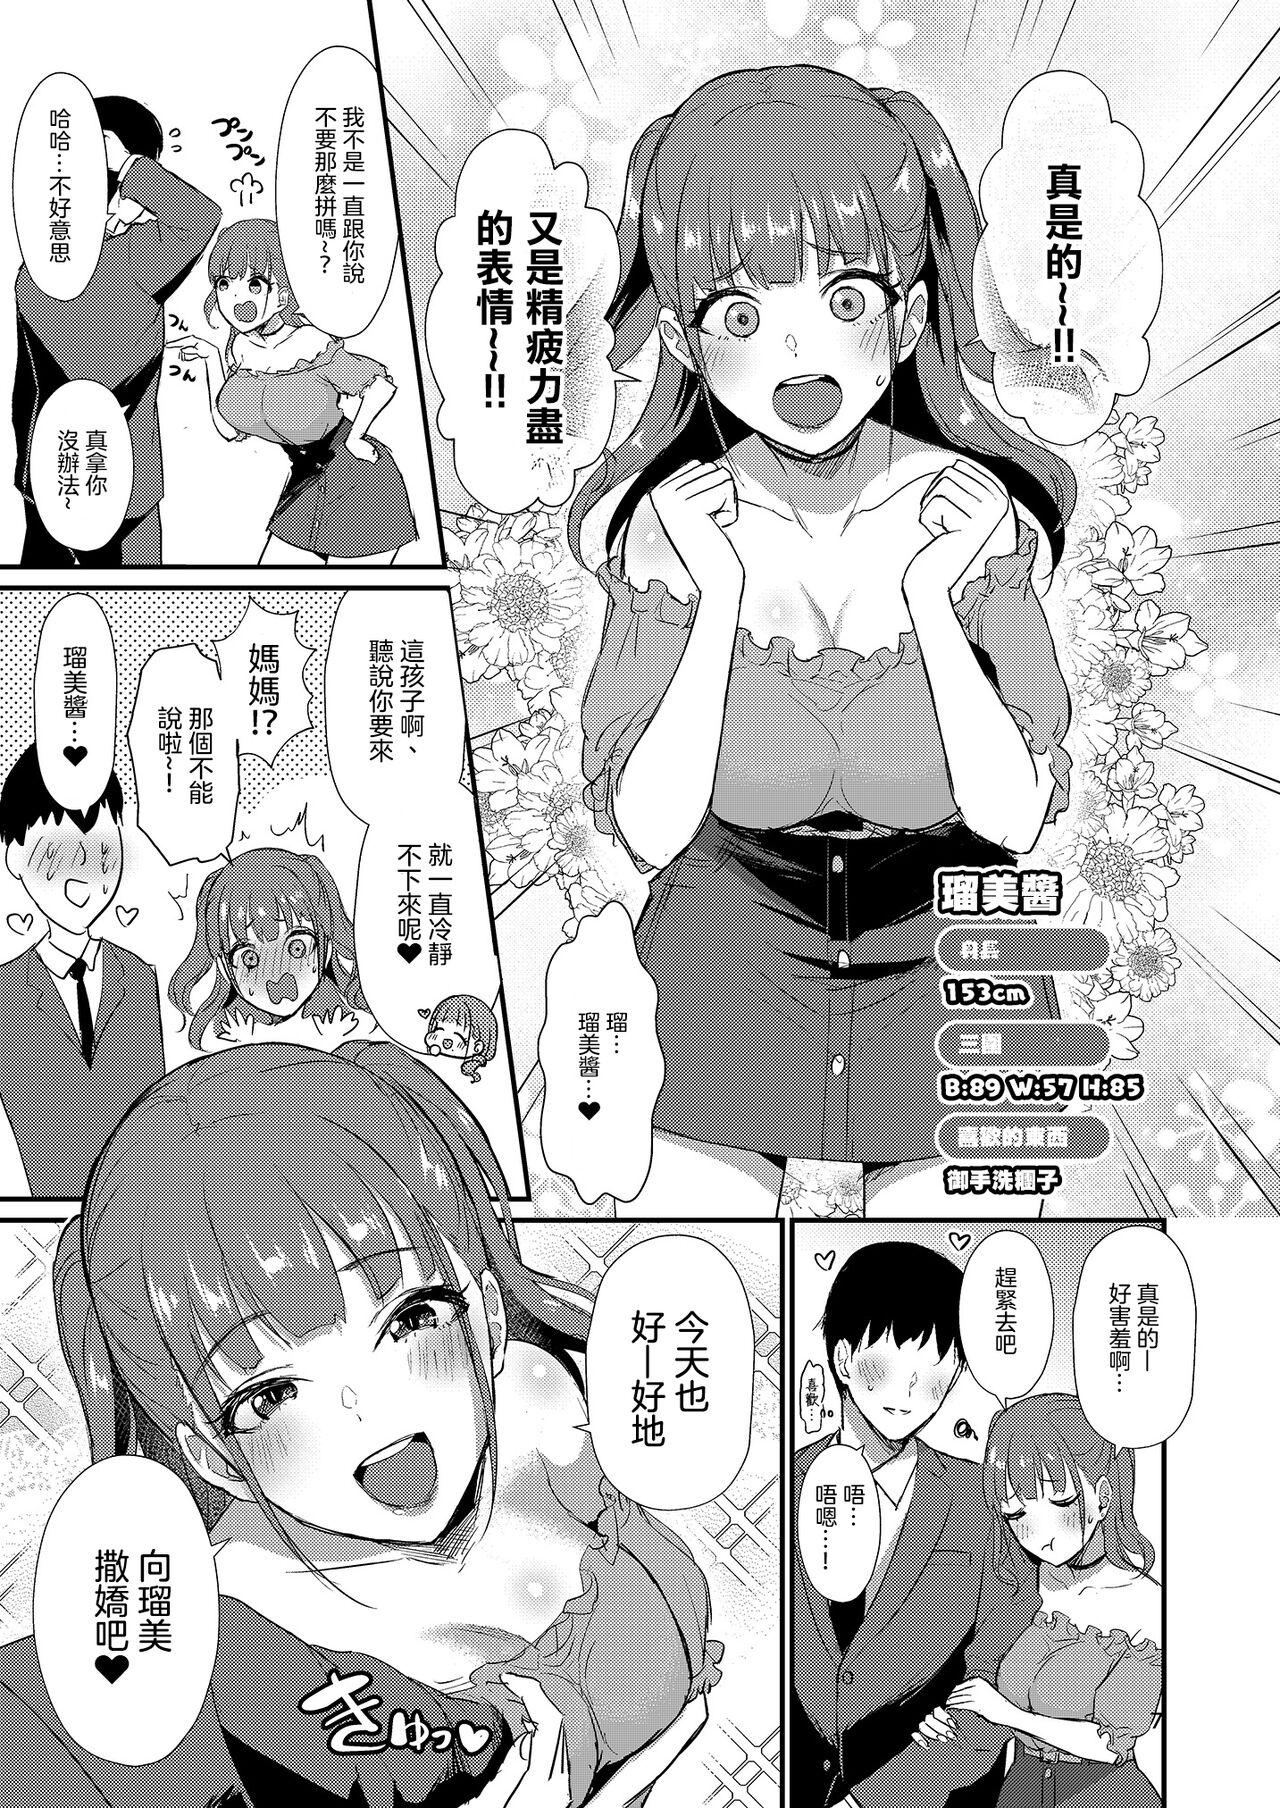 Classy Homehome Home e Youkoso! - Welcome to Home Home Home! | 歡迎來到誇誇屋！ Venezuela - Page 8